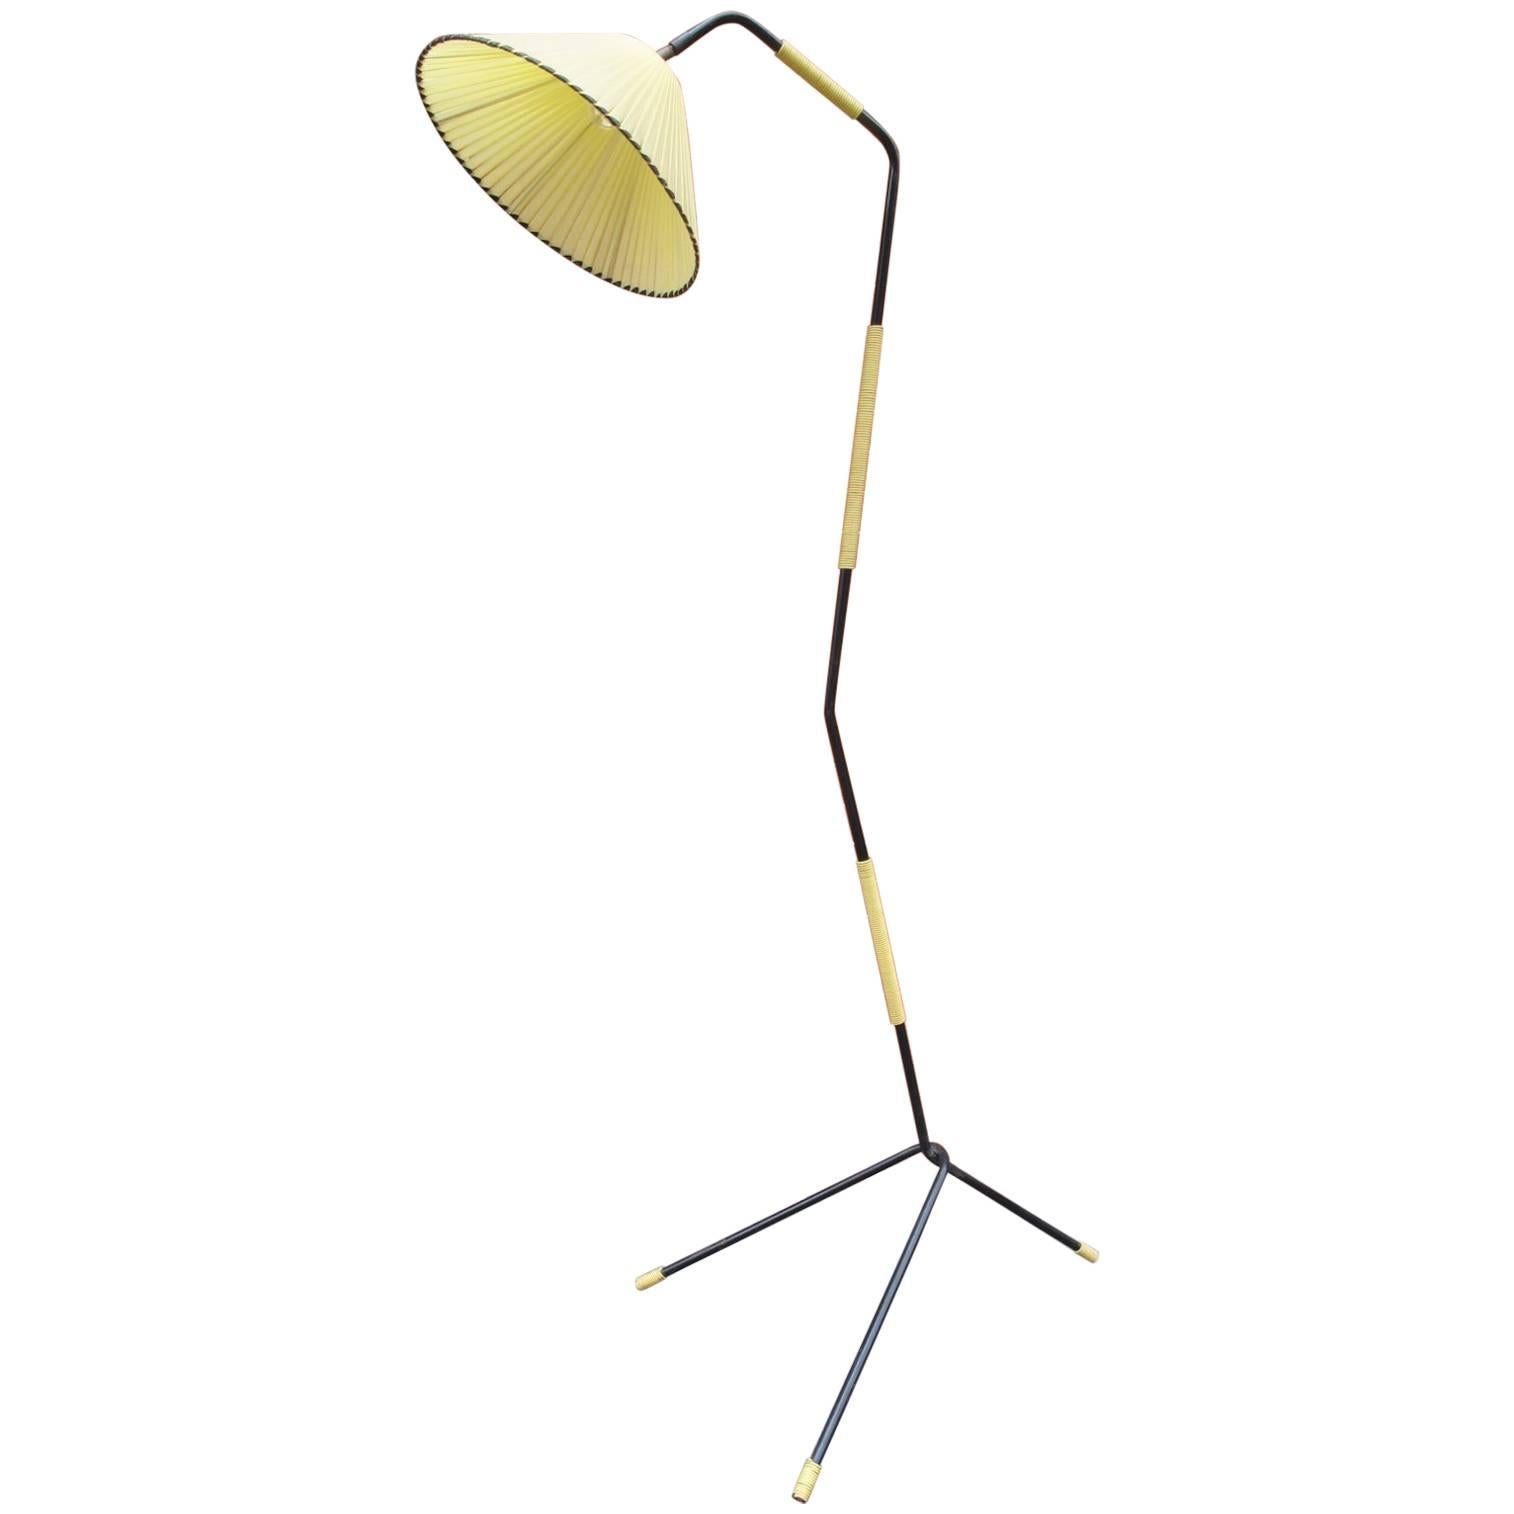 Exceptional Floor Lamp, Manner of Paavo Tynell